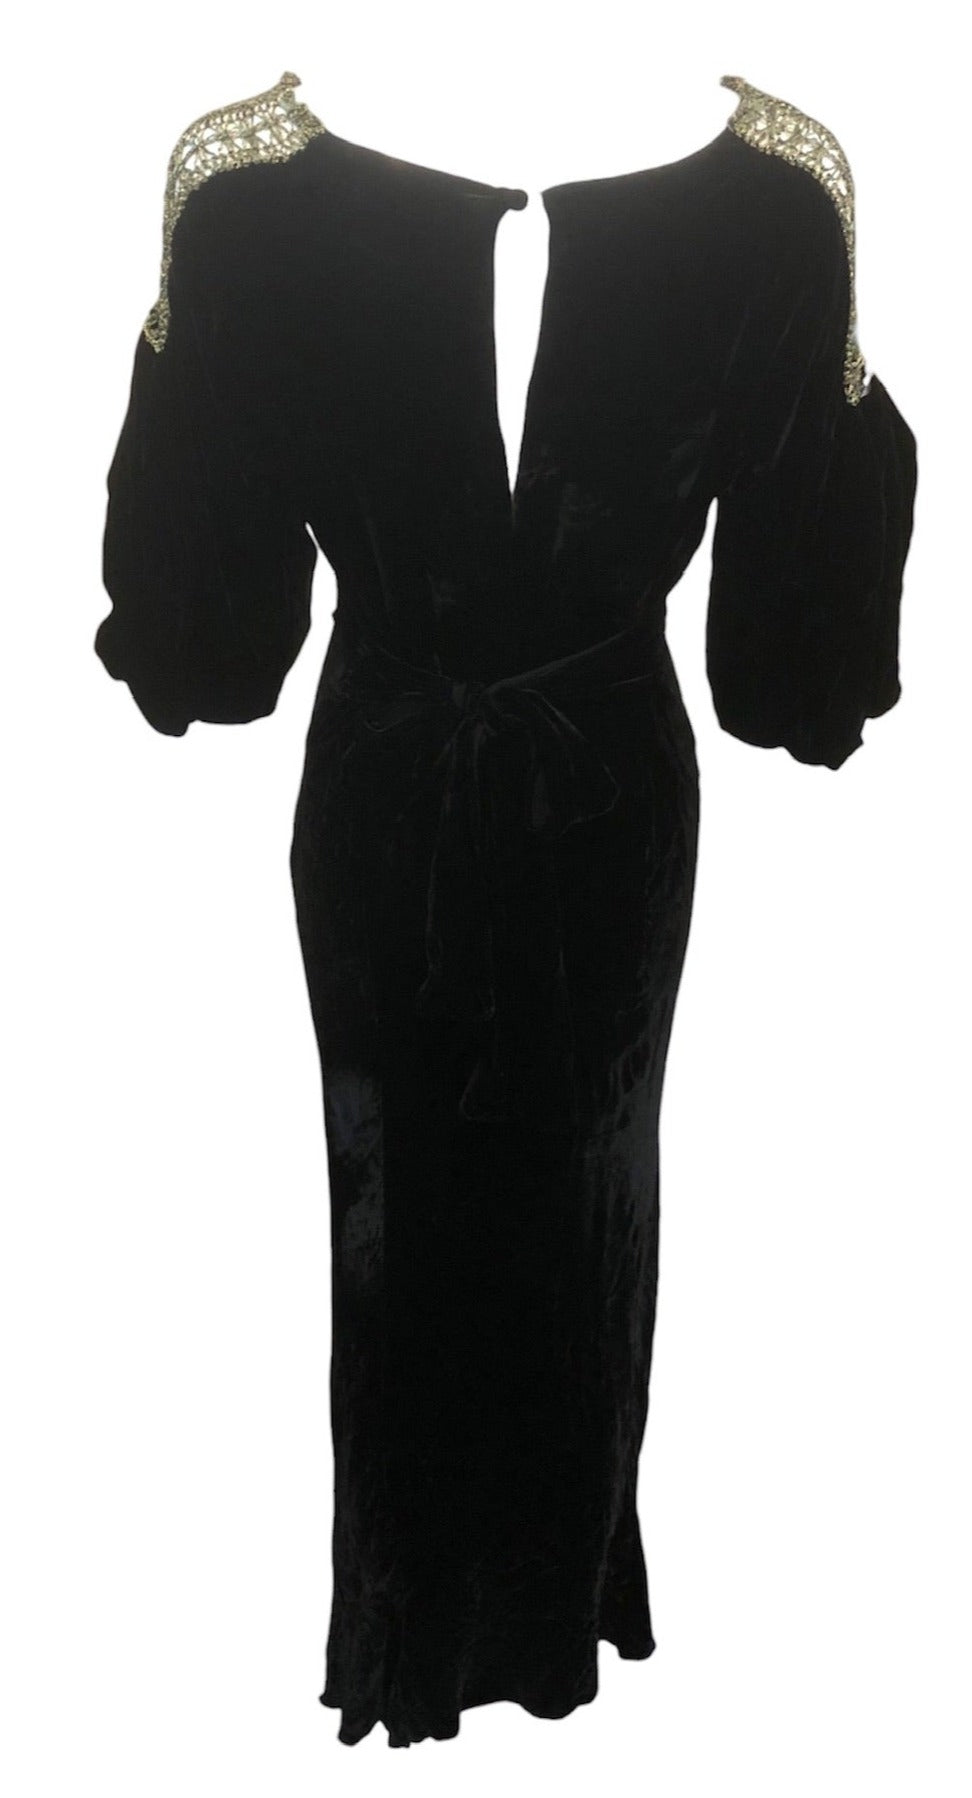  30s Black Silk Velvet Bias Cut Gown with Gold Lame Accents BACK 3 of 5